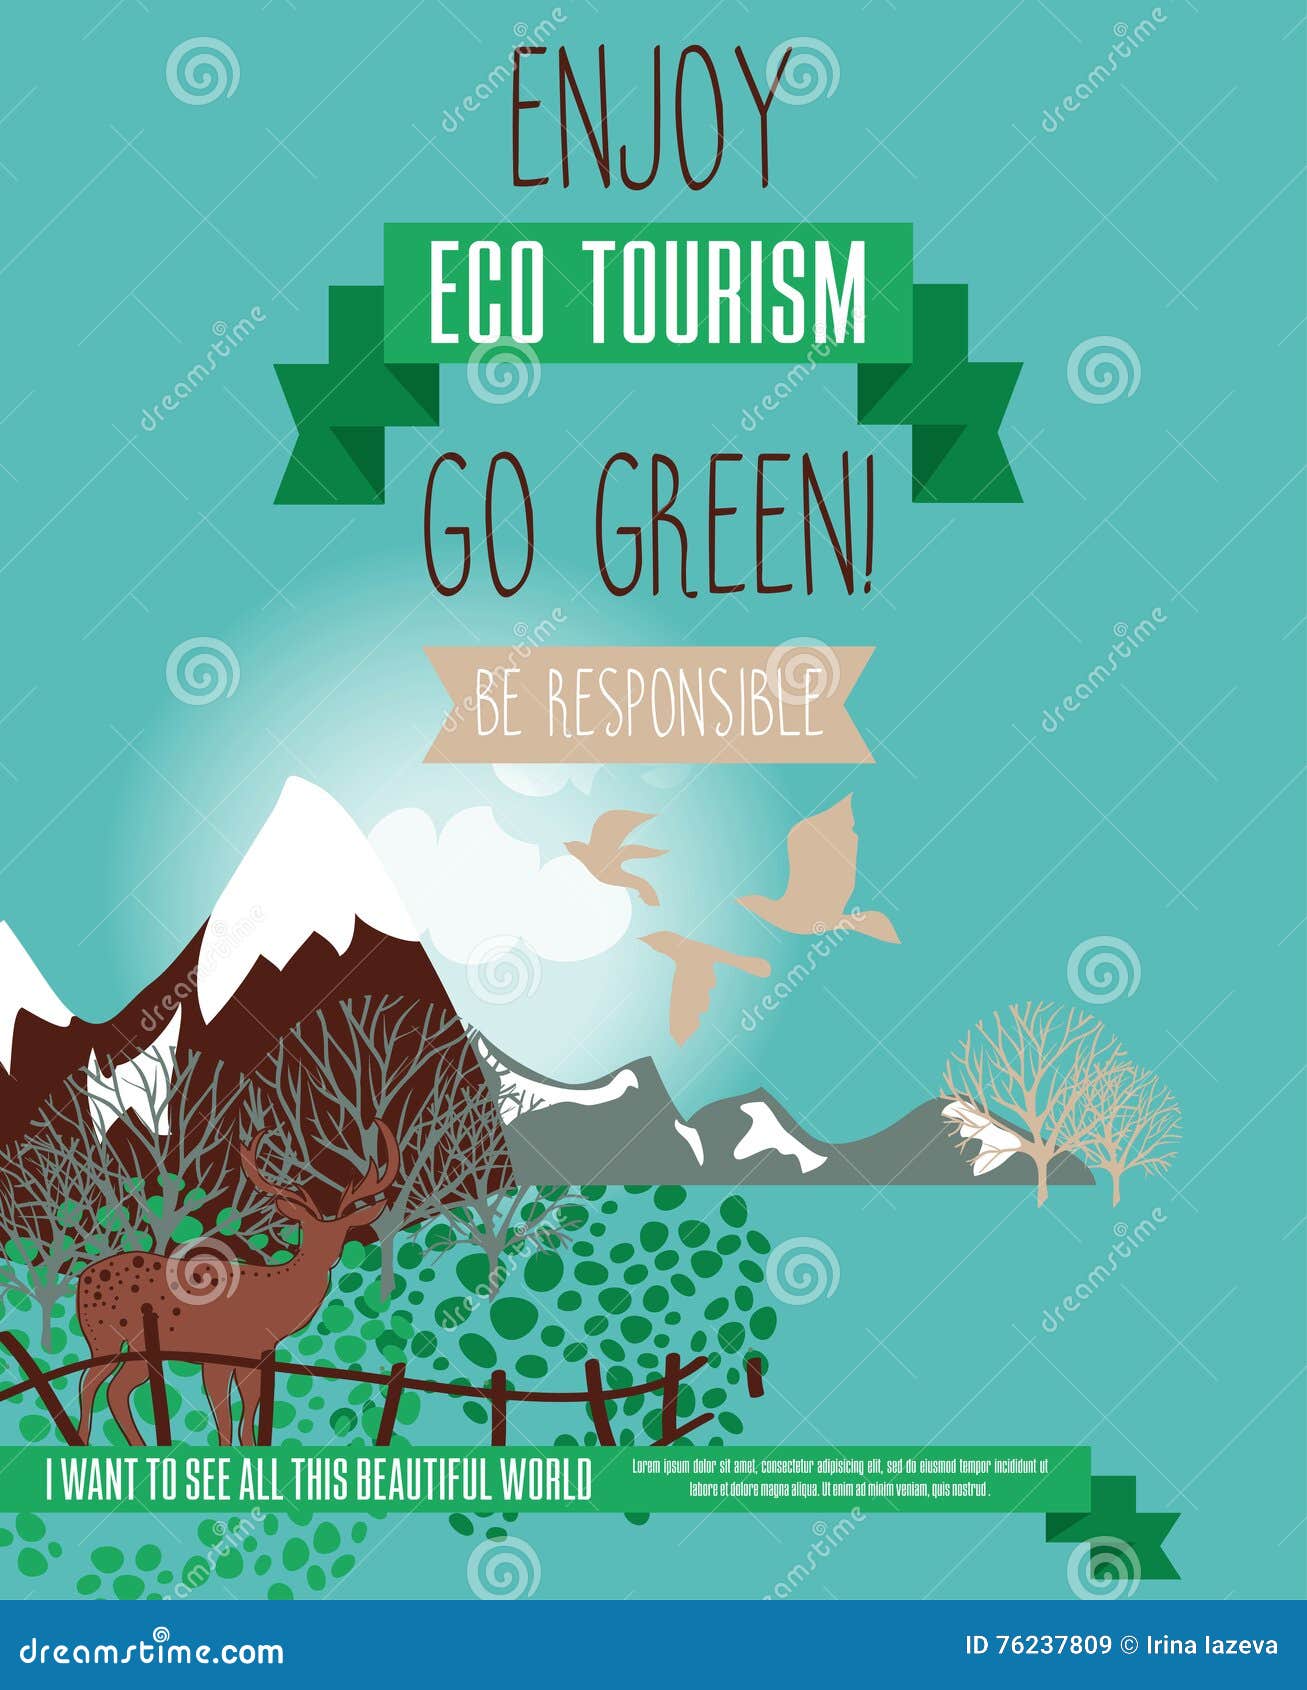 eco tourism poster background